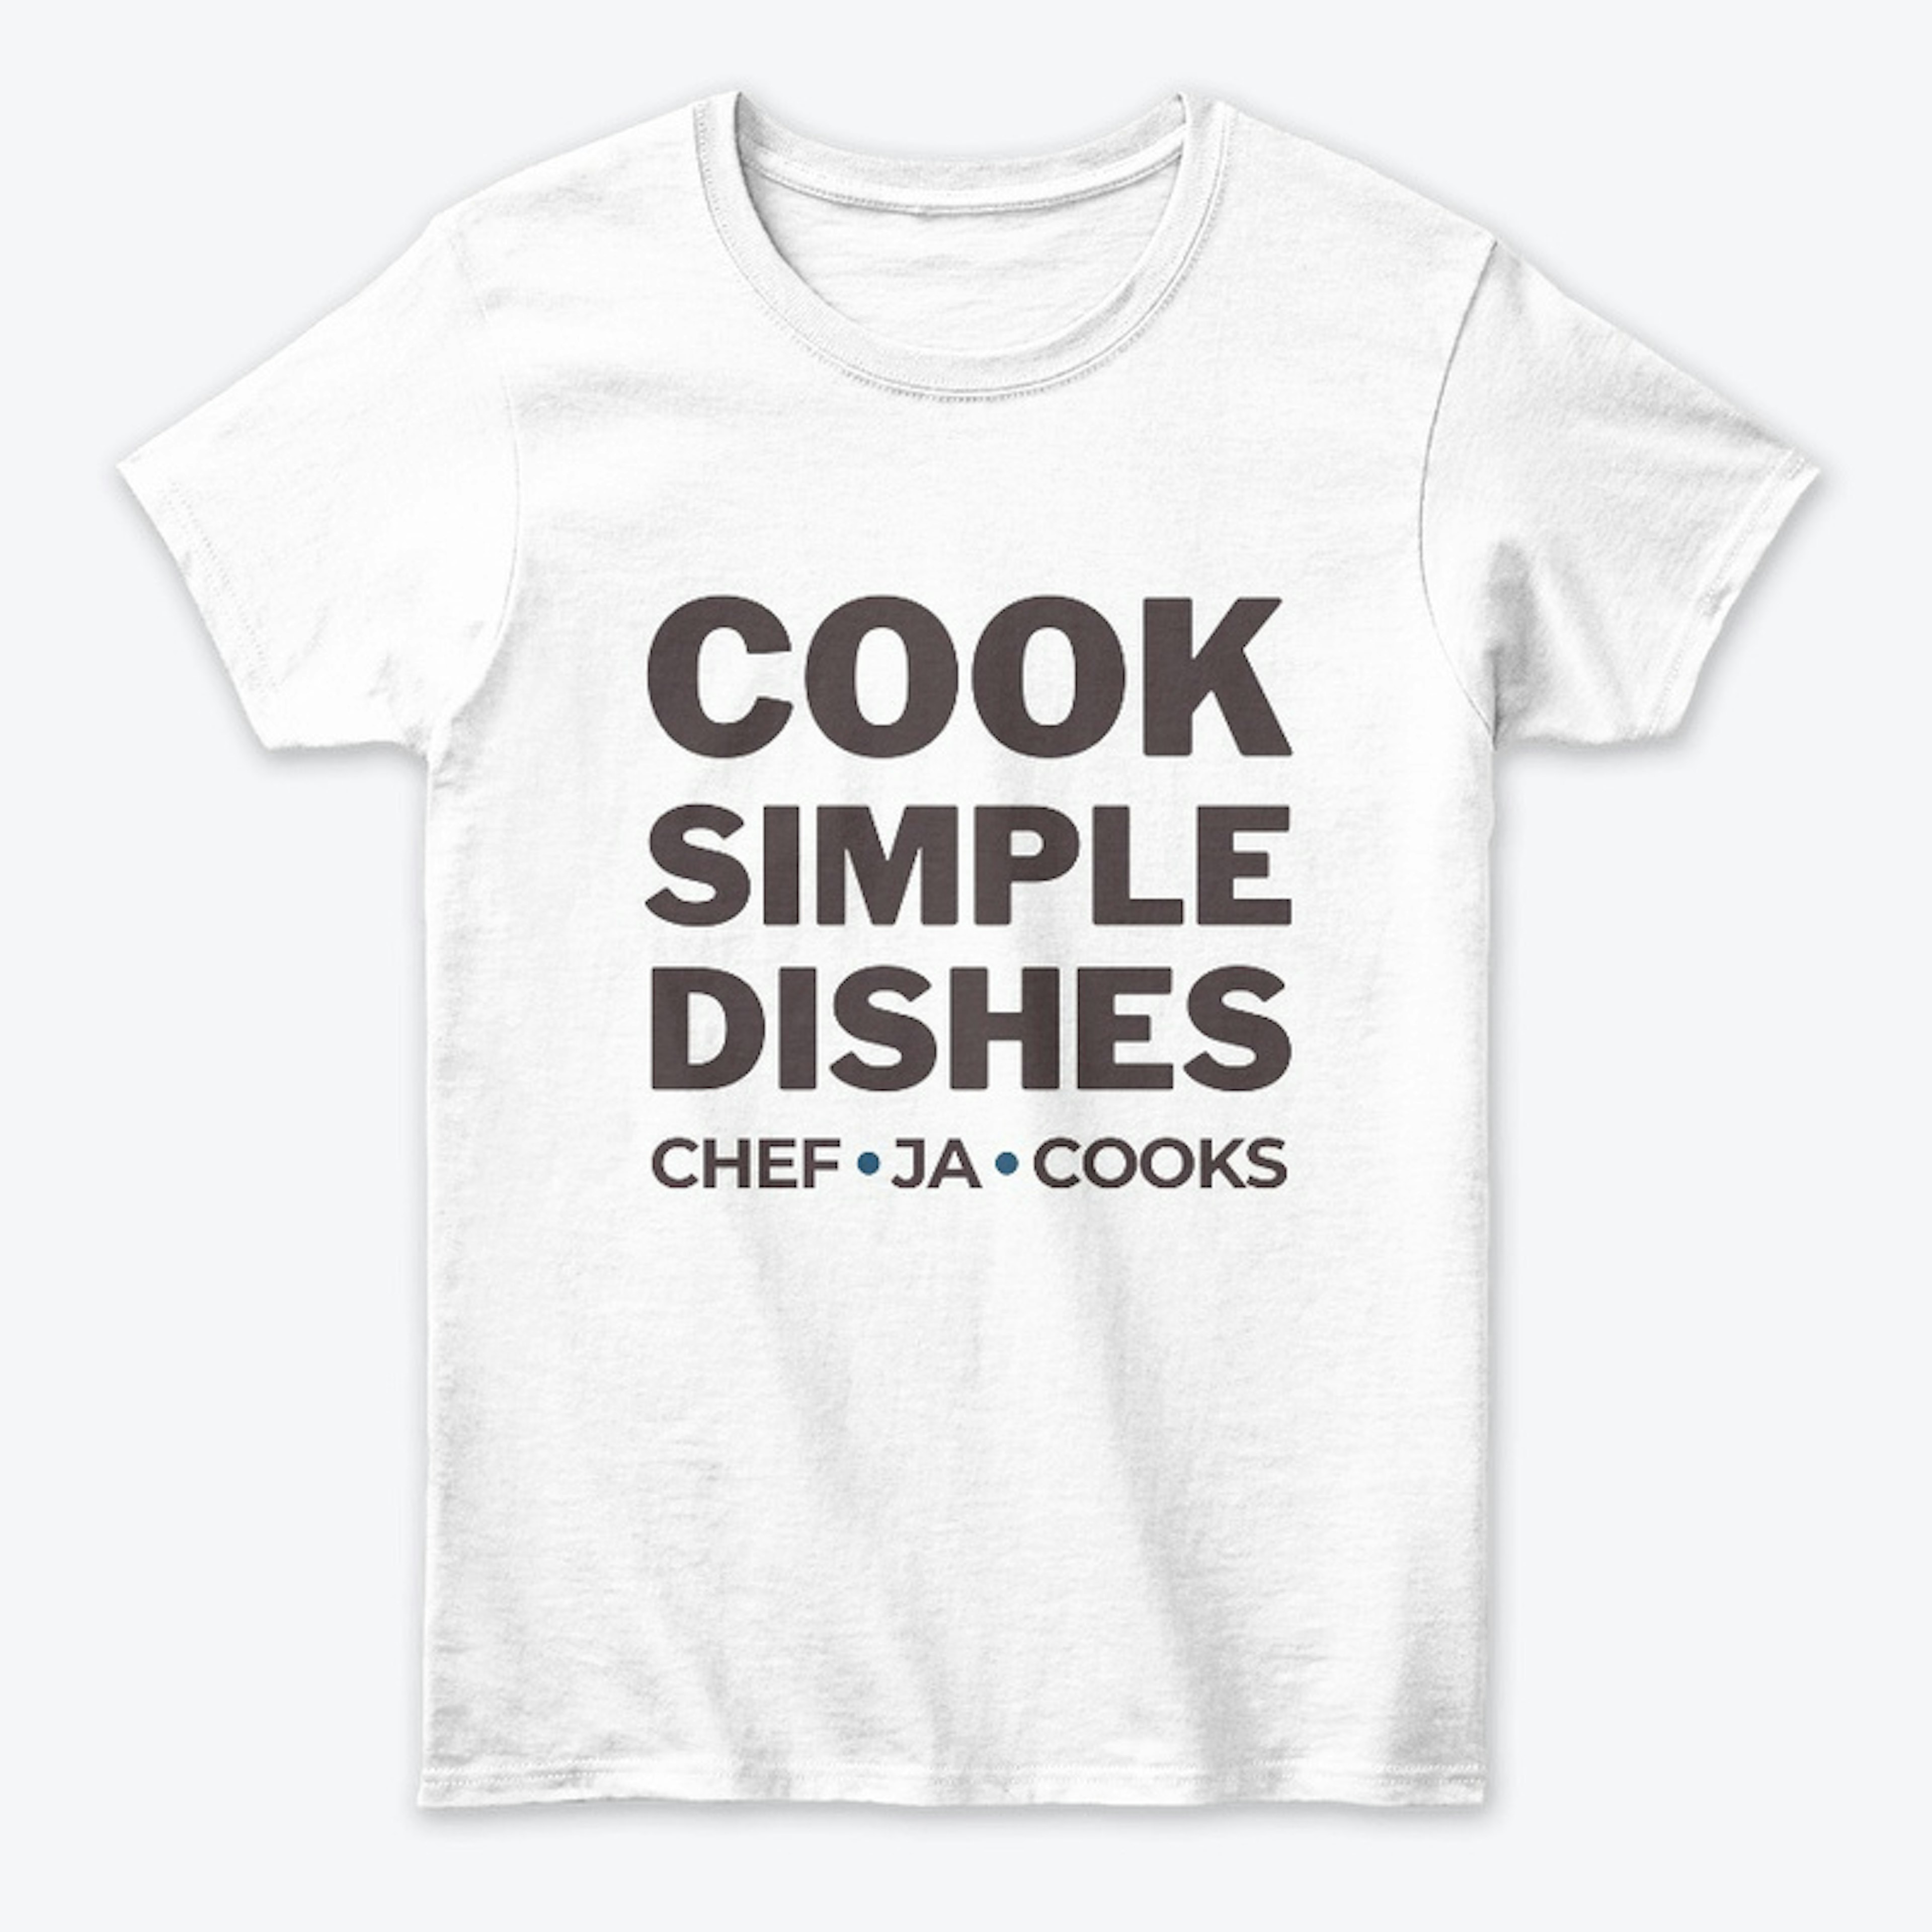 "Cook Simple Dishes" Apparel